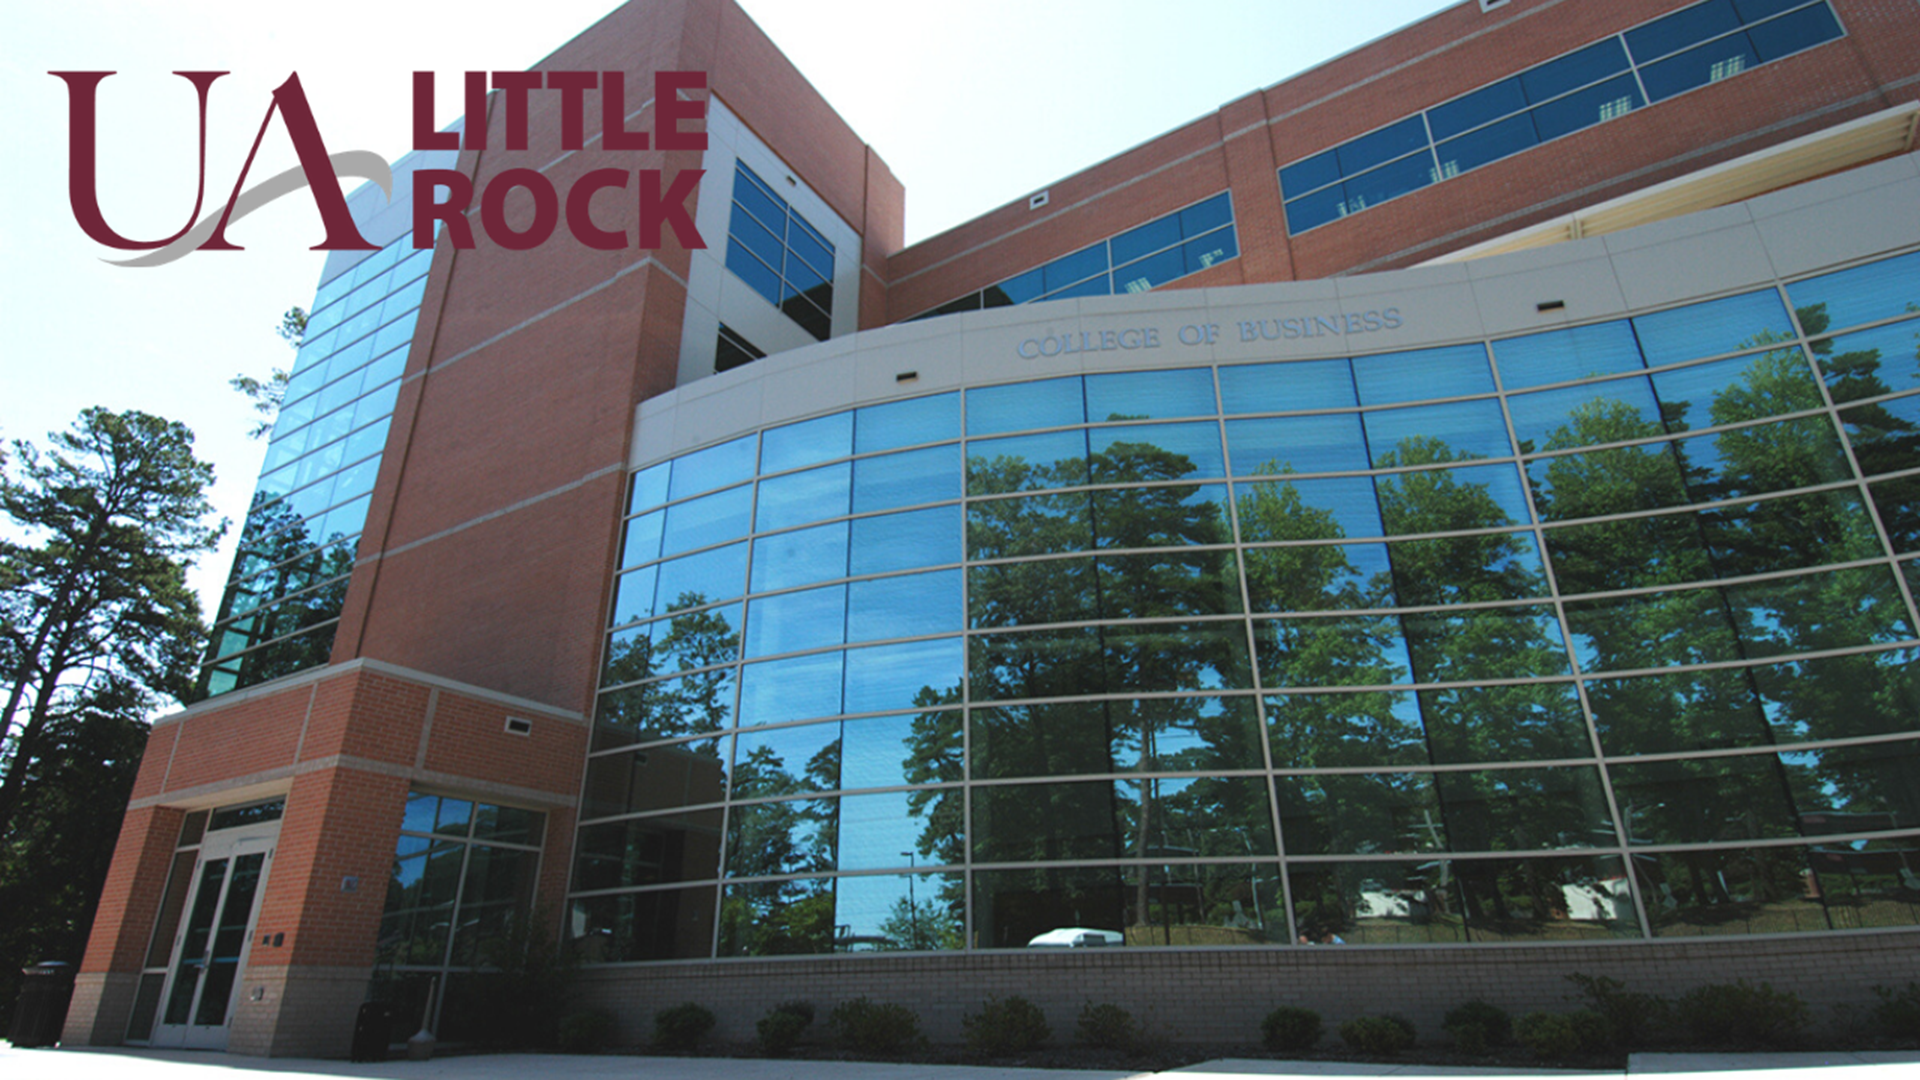 UA Little Rock is currently running a Volunteer Income Tax Assistance (VITA) program to help people file their taxes for free.